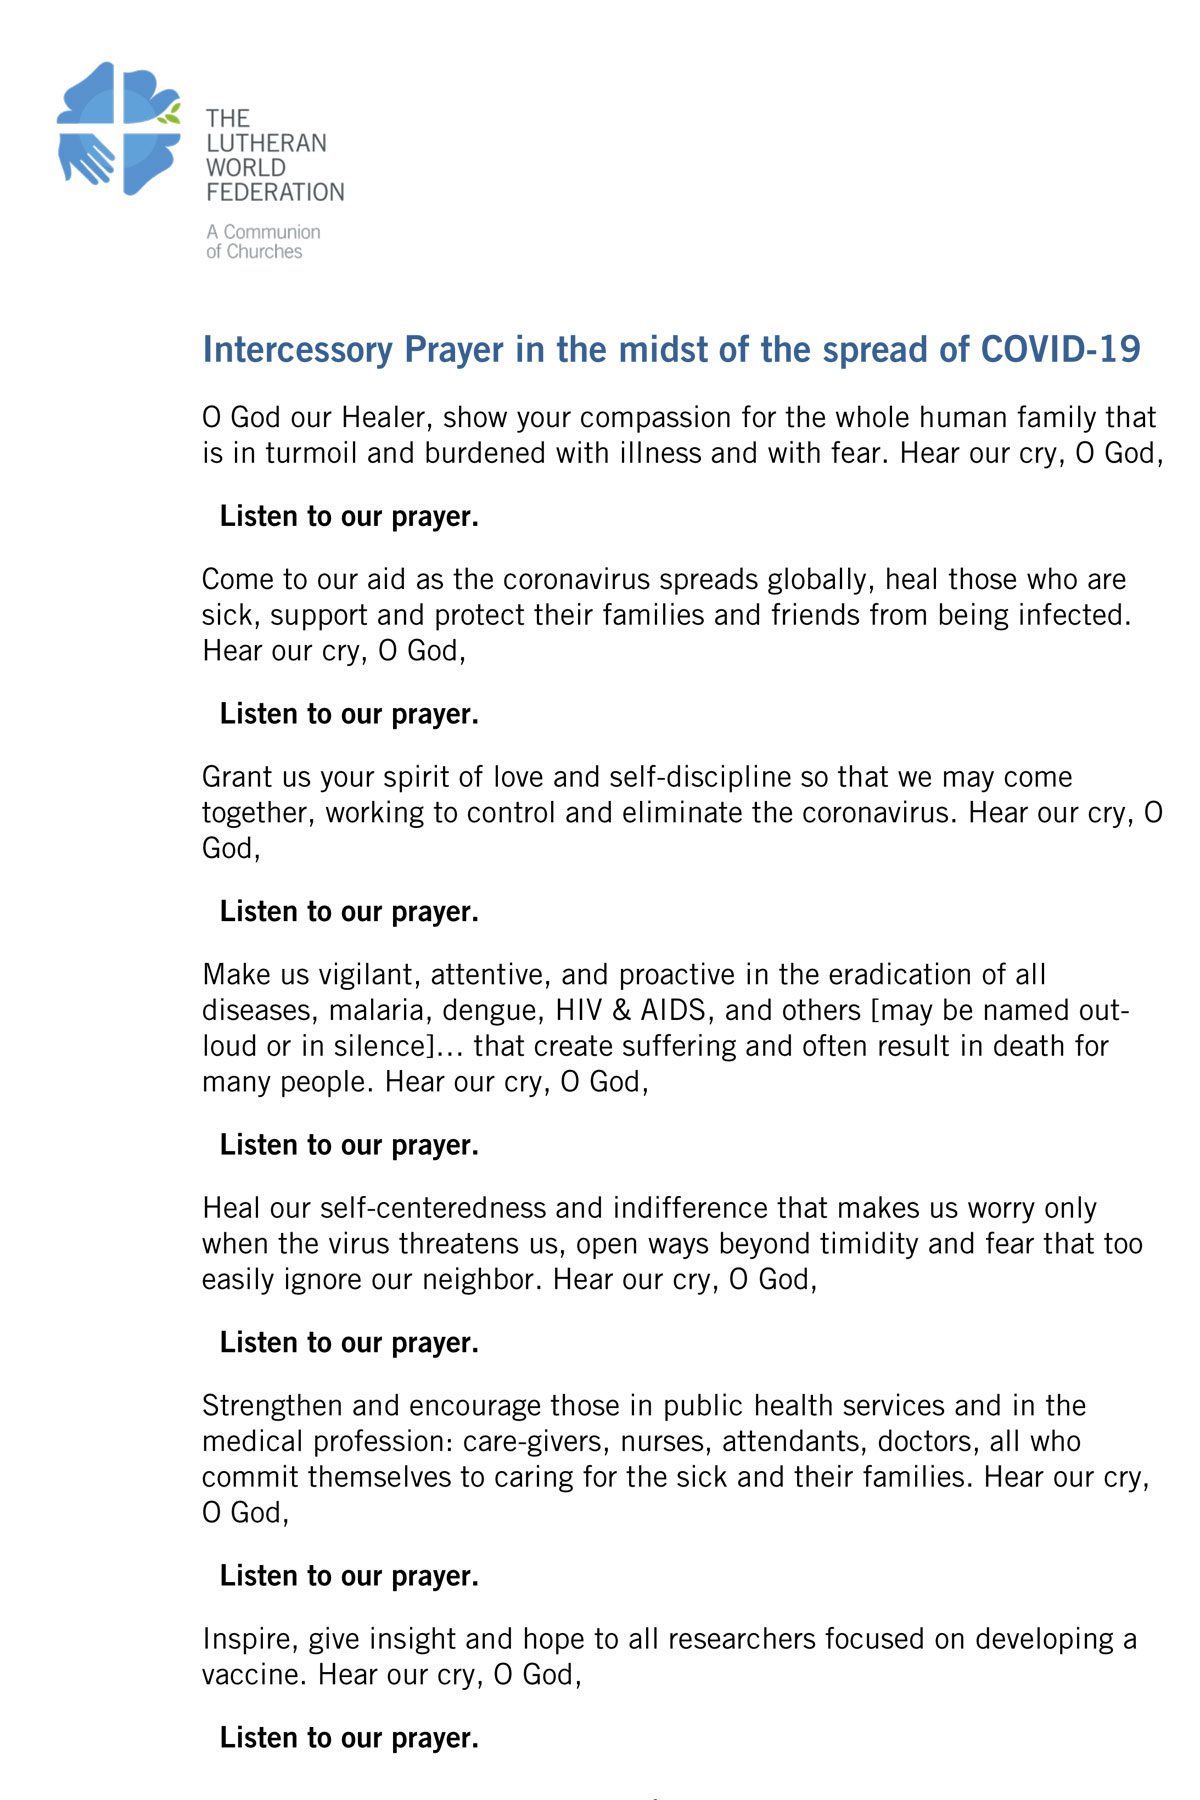 Intercessory Prayer in the midst of the spread of COVID-19